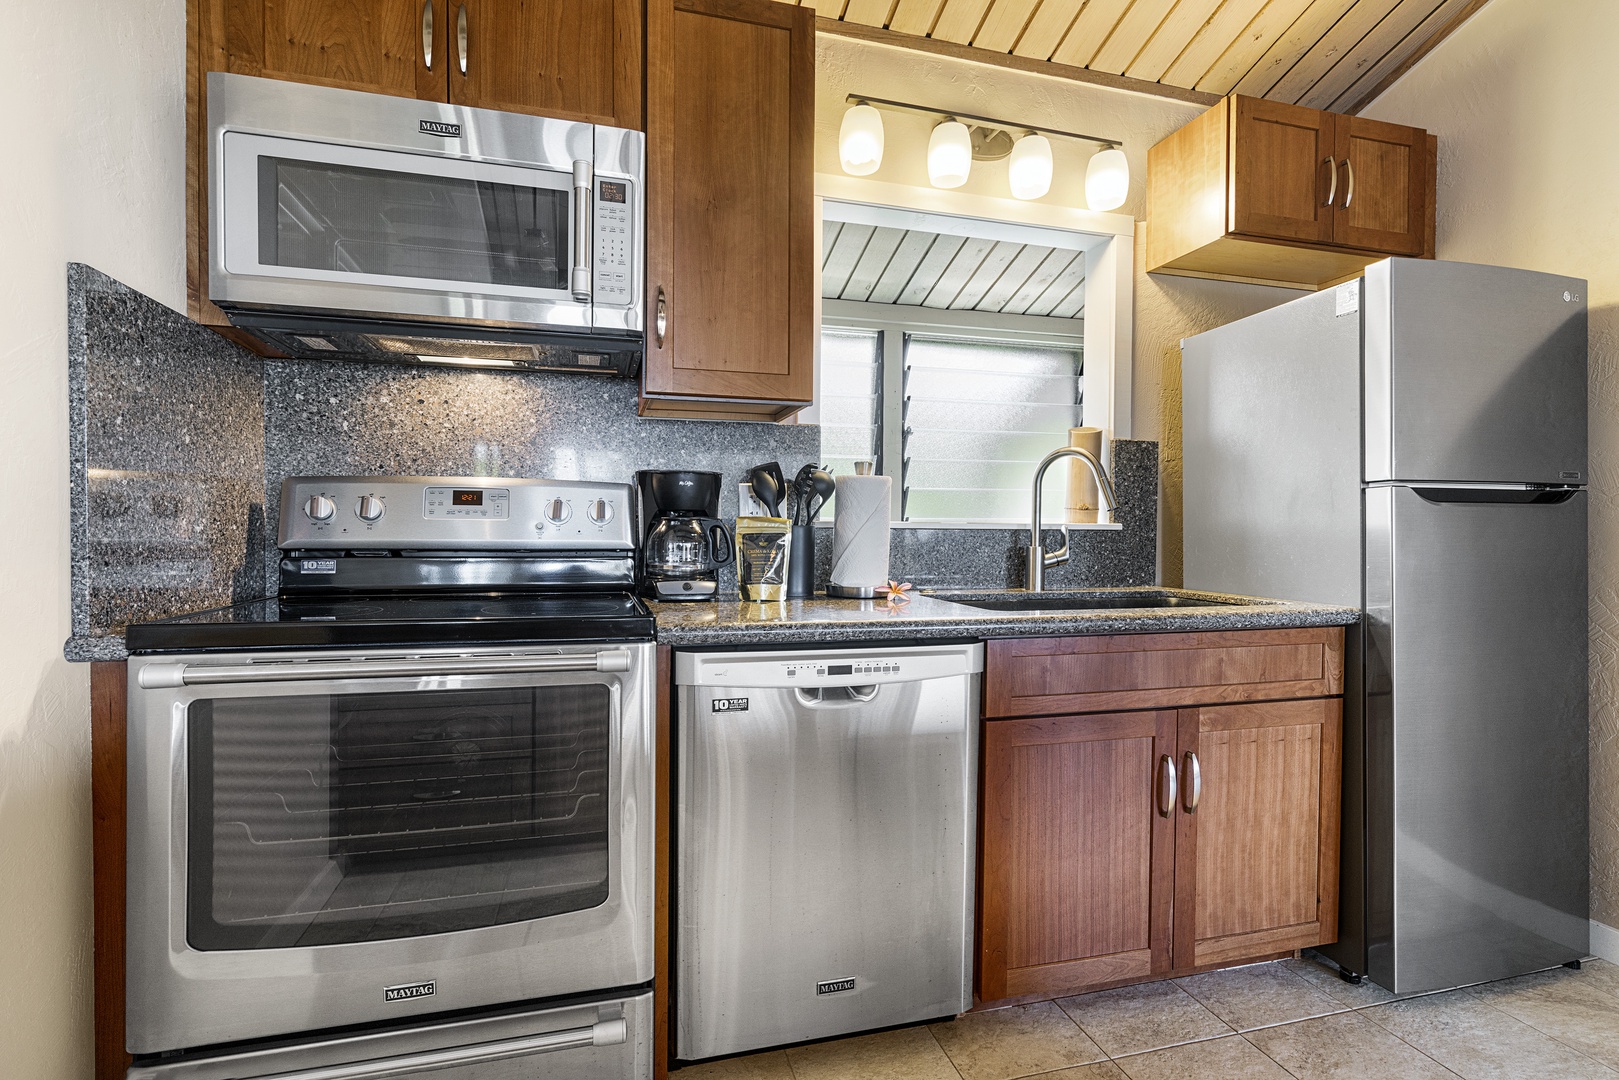 Kailua Kona Vacation Rentals, Keauhou Resort 113 - Remodeled kitchen suitable even for a chef!